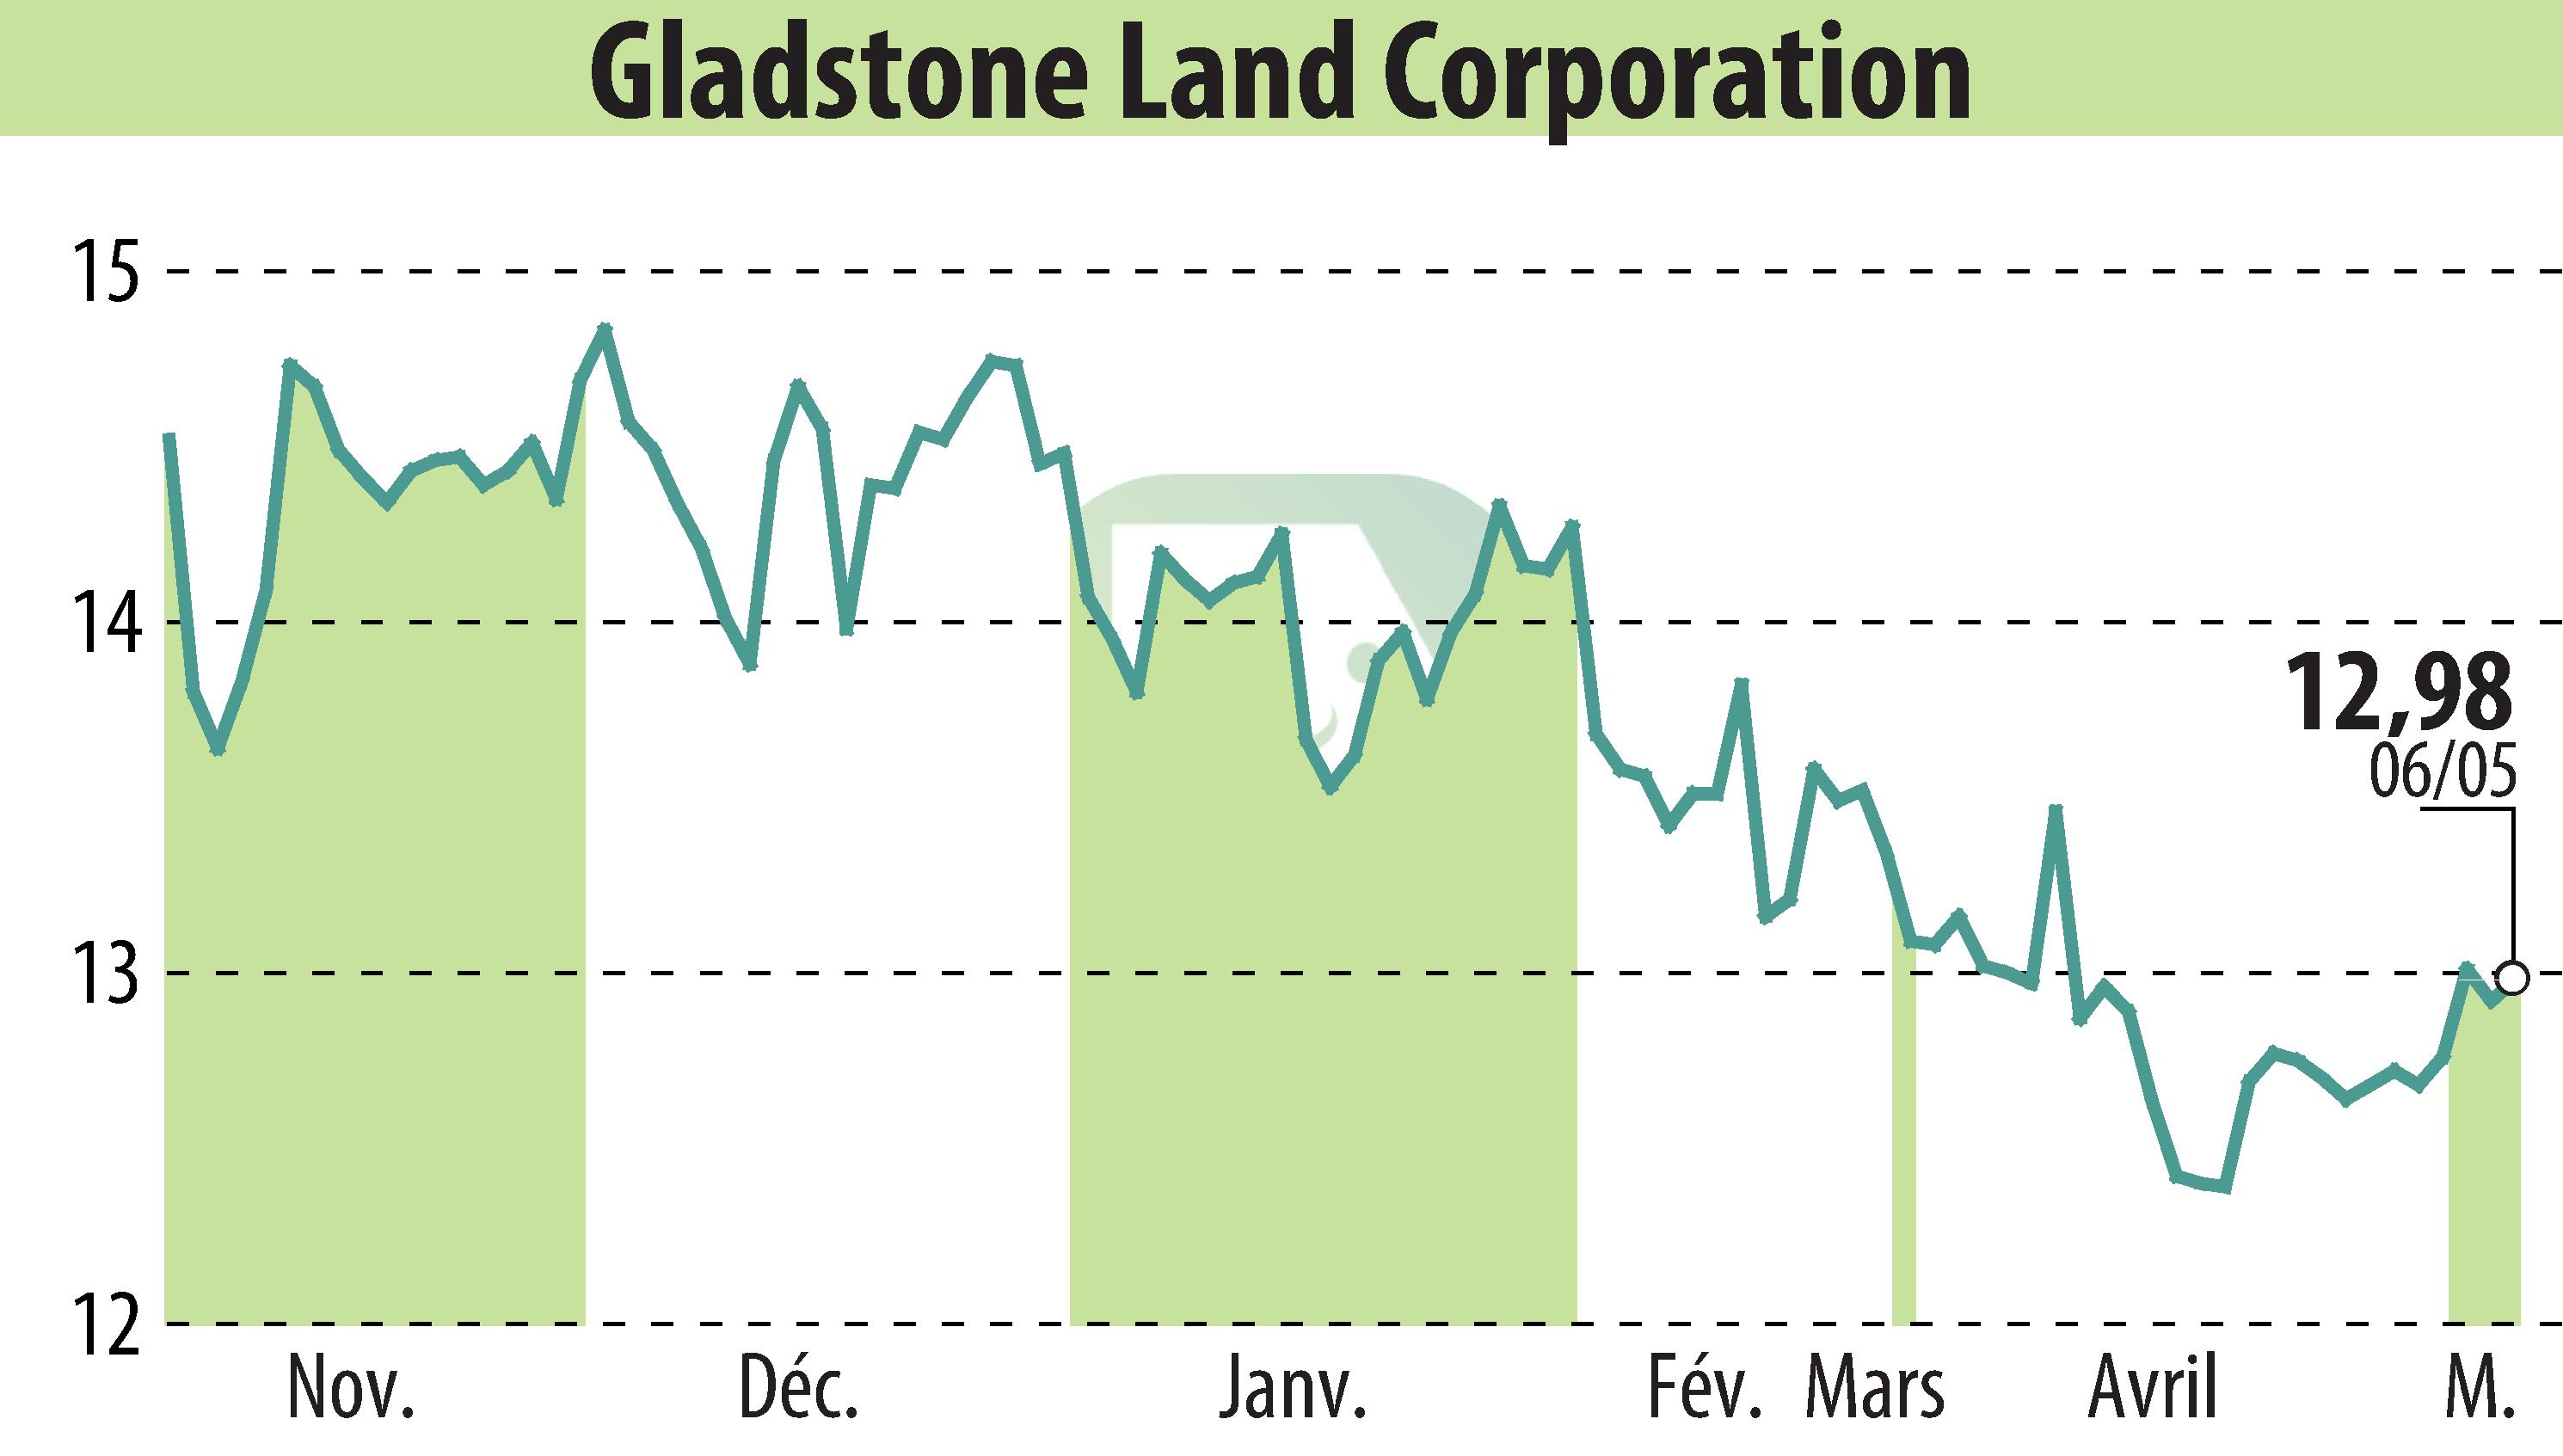 Stock price chart of Gladstone Land Corporation (EBR:LAND) showing fluctuations.